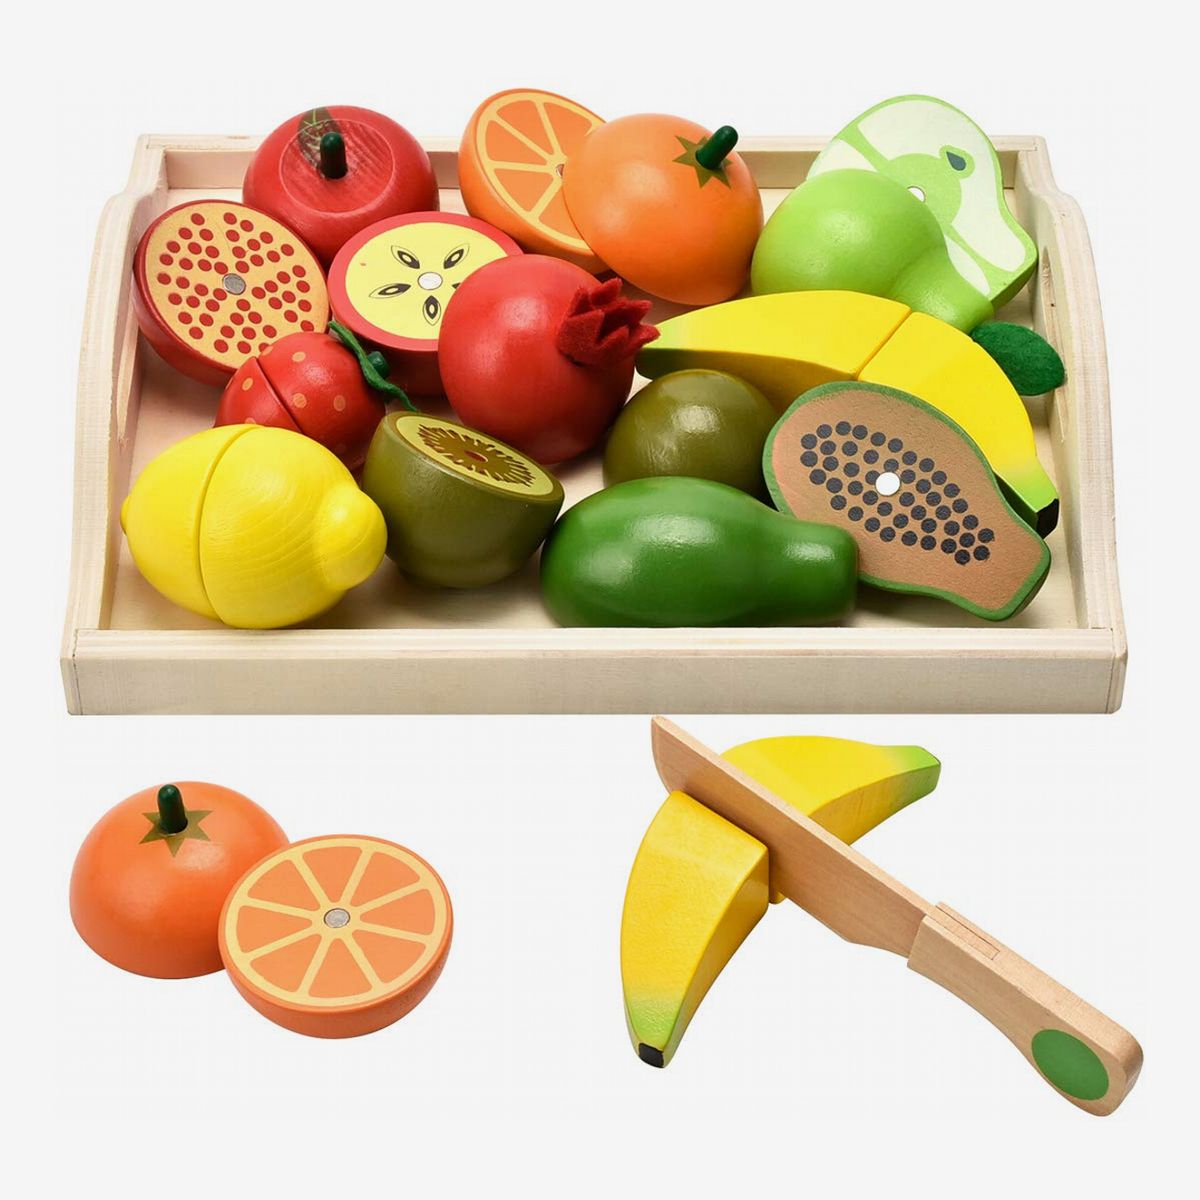 16 pieces Play Right Wooden Food Playset Fruit 